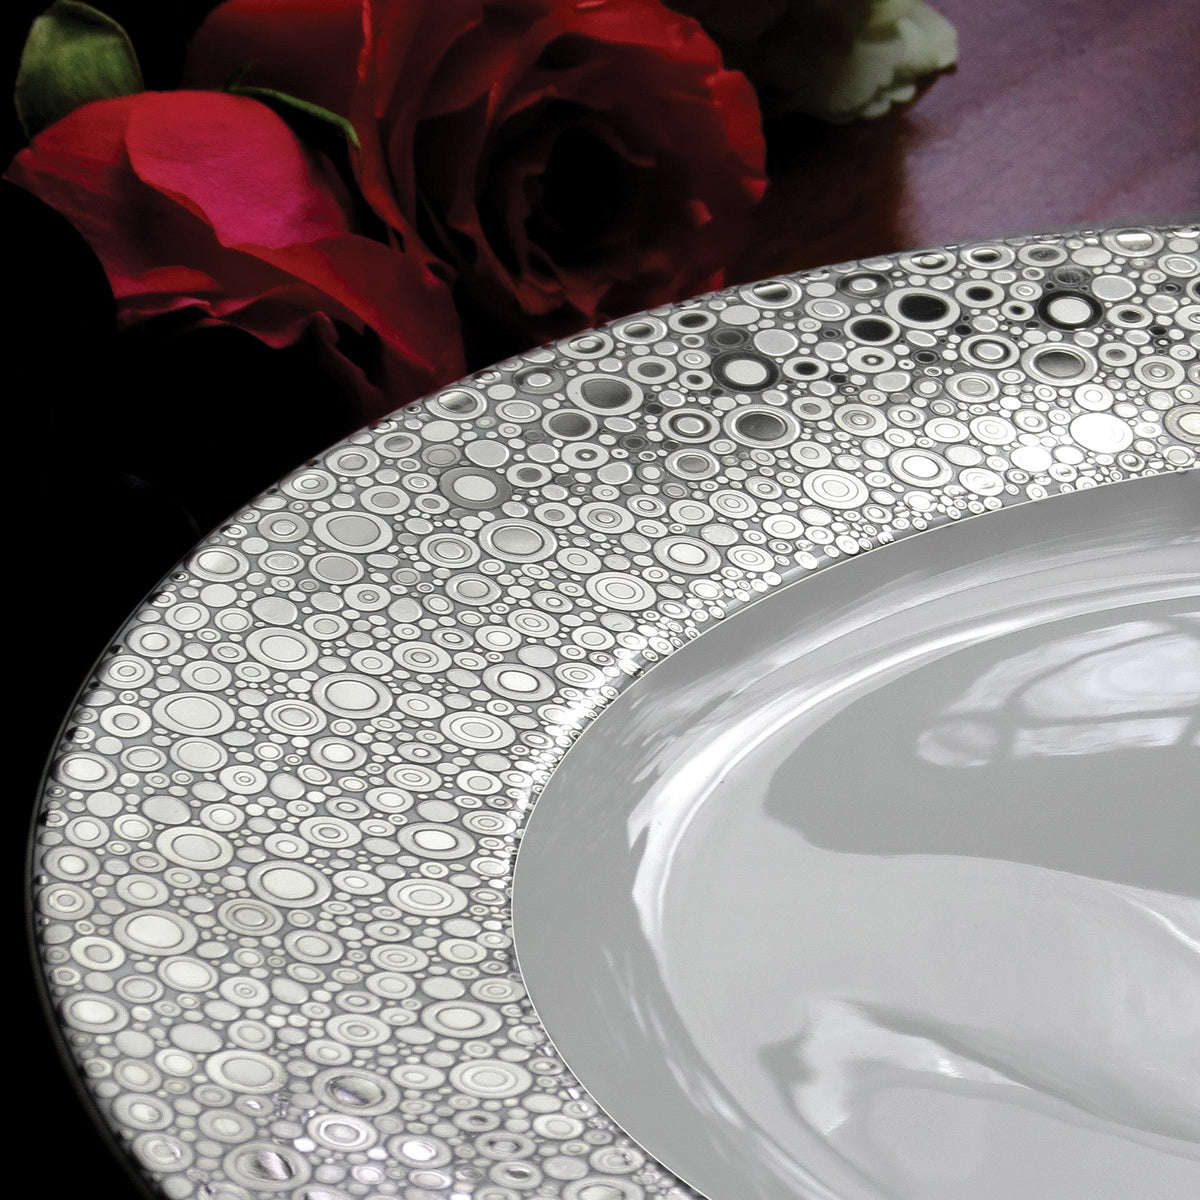 A Ellington Shine Platinum Bread &amp; Butter Plate with a rose on it, made of bone china from Caskata Artisanal Home.